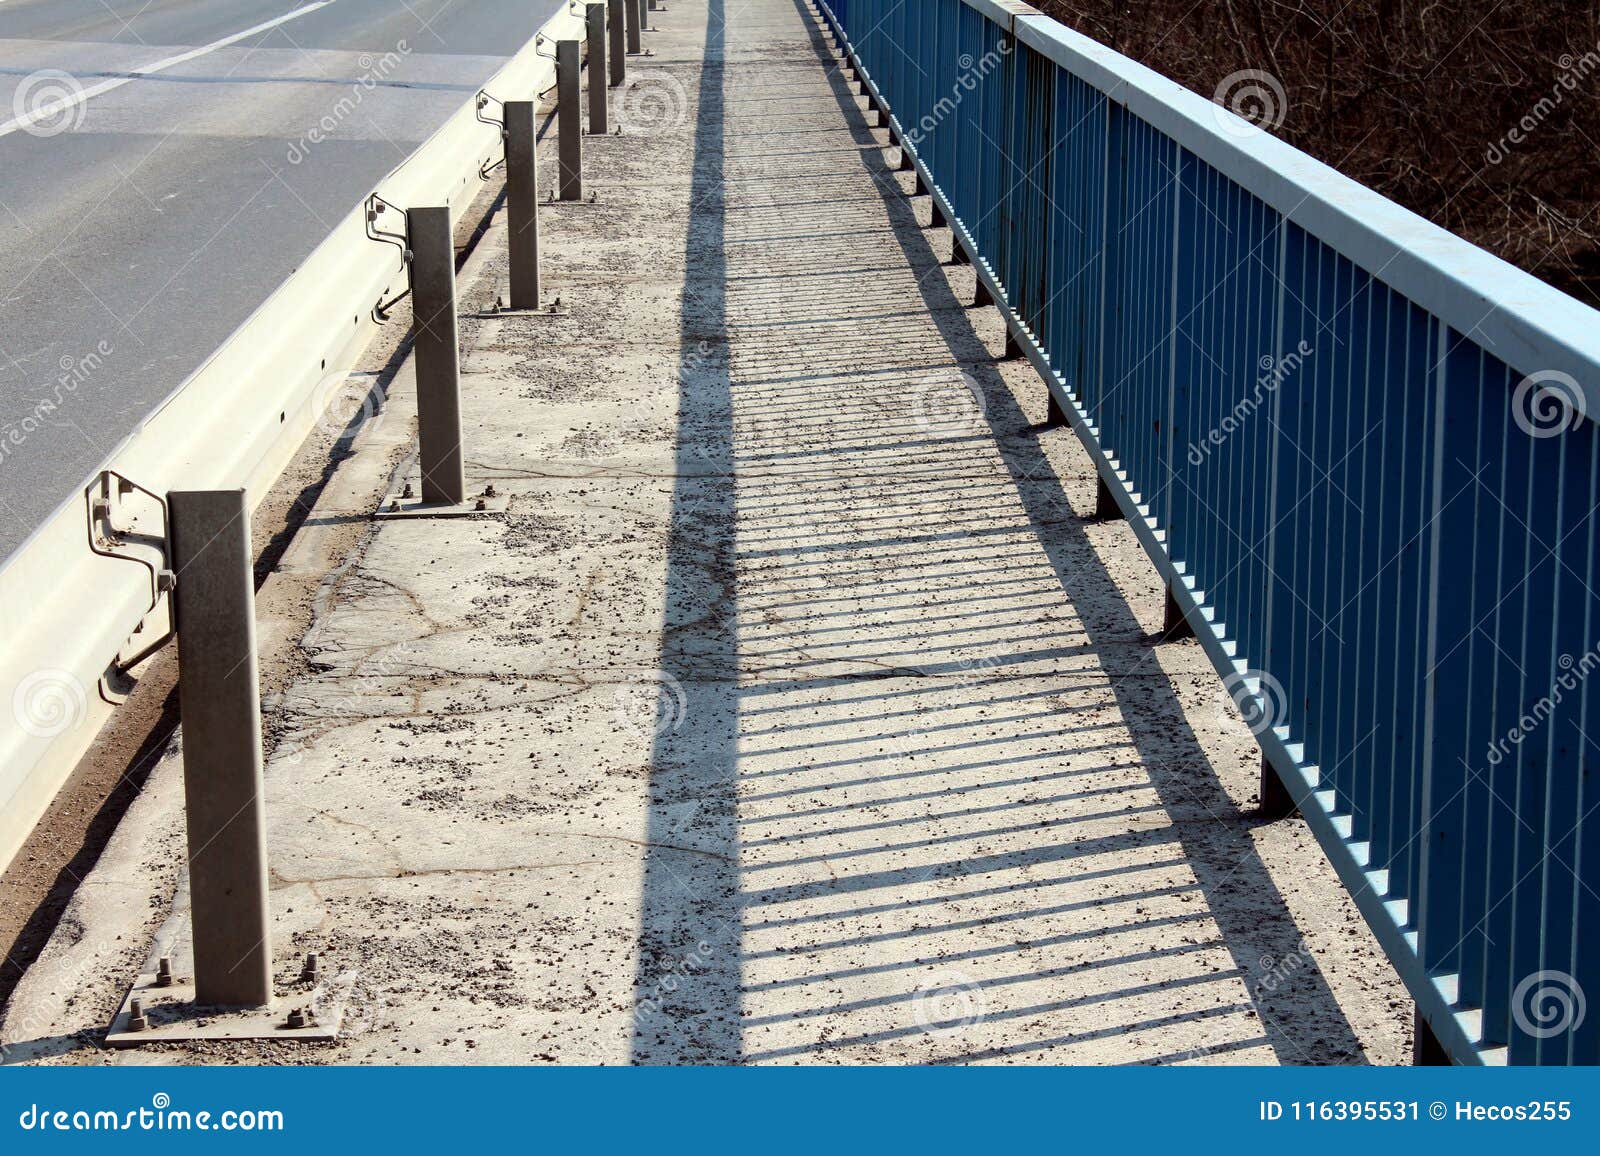 Bridge Sidewalk with Guardrail and Fence Stock Image - Image of warm ...